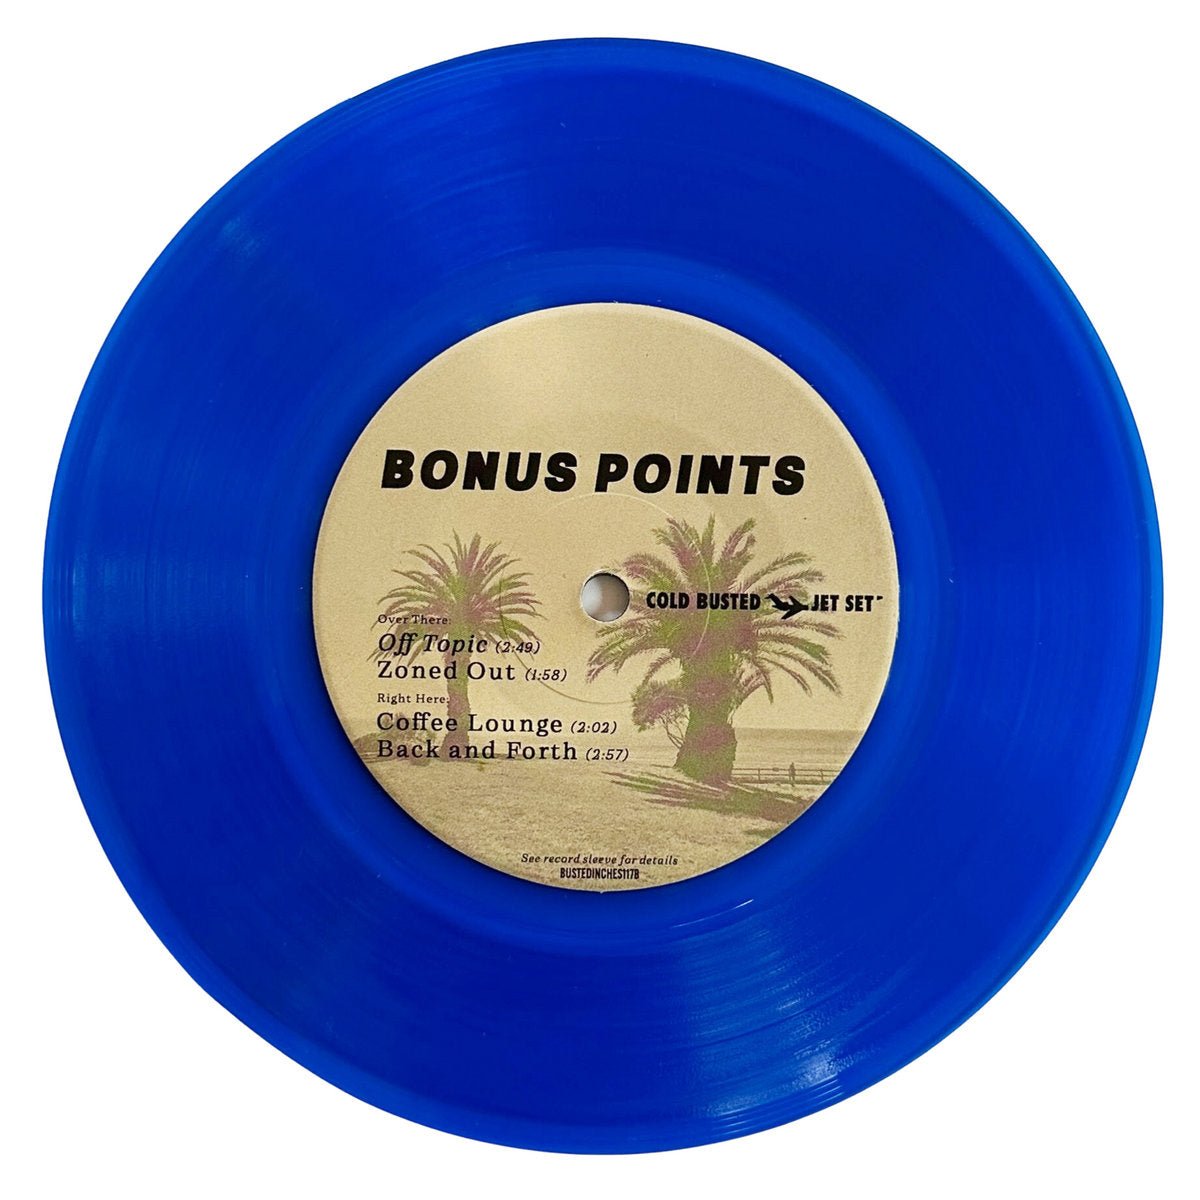 Bonus Points - Off Topic - Limited Edition Transparent Blue Colored 7 Inch Vinyl - Cold Busted